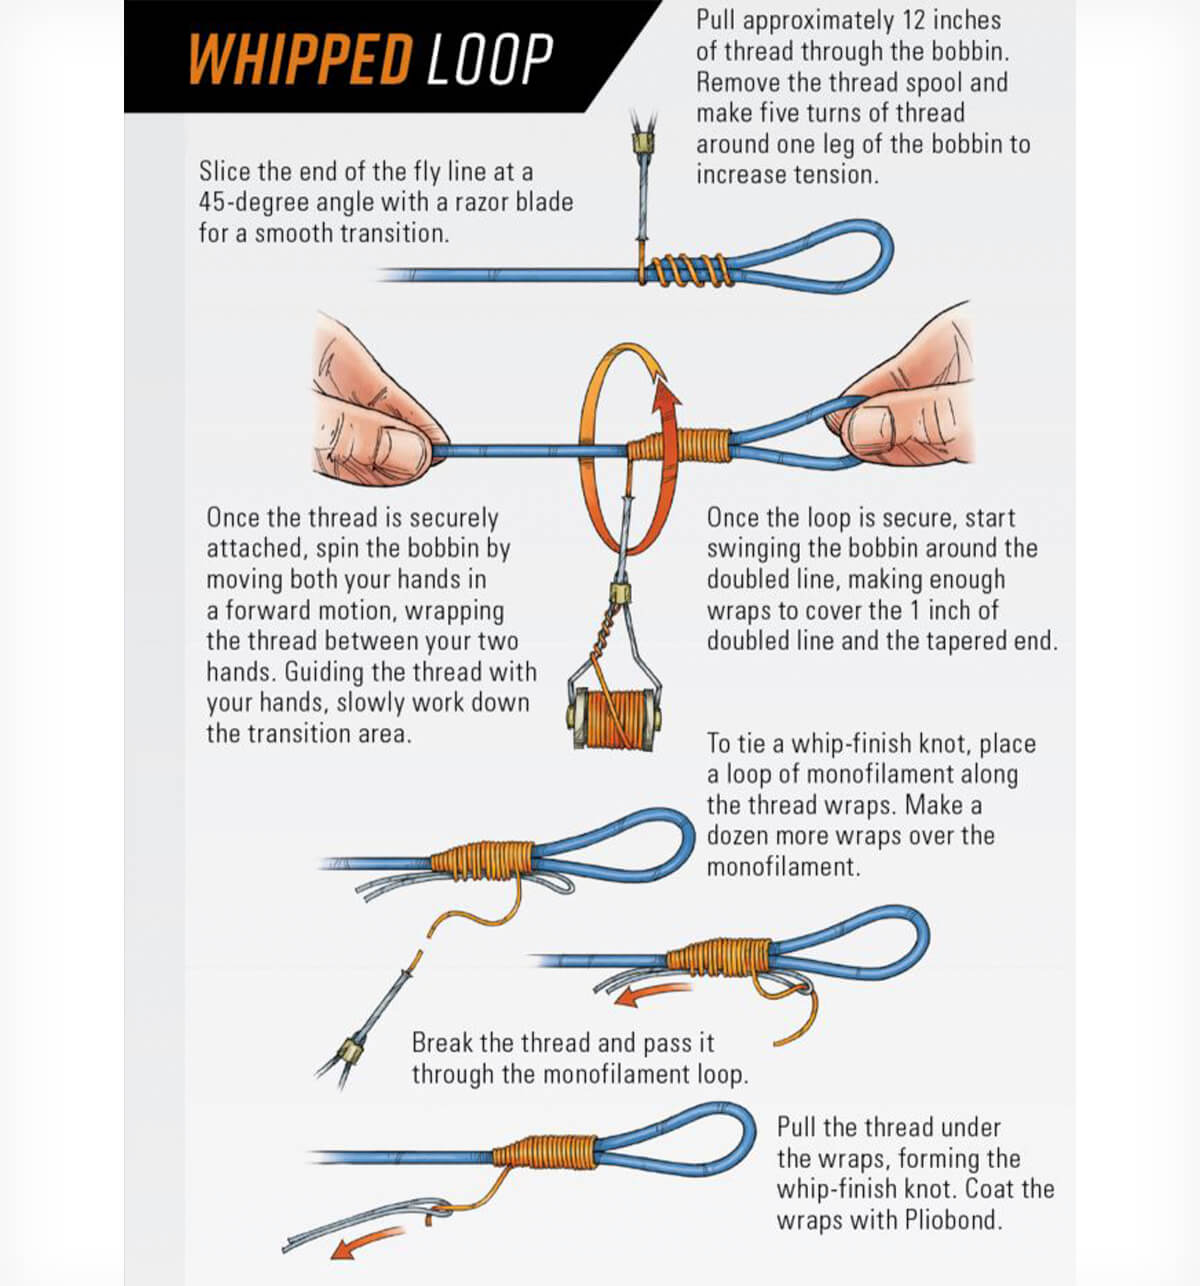 Pitzen Knot: 5 Simple Steps to Tying the Pitzen Knot